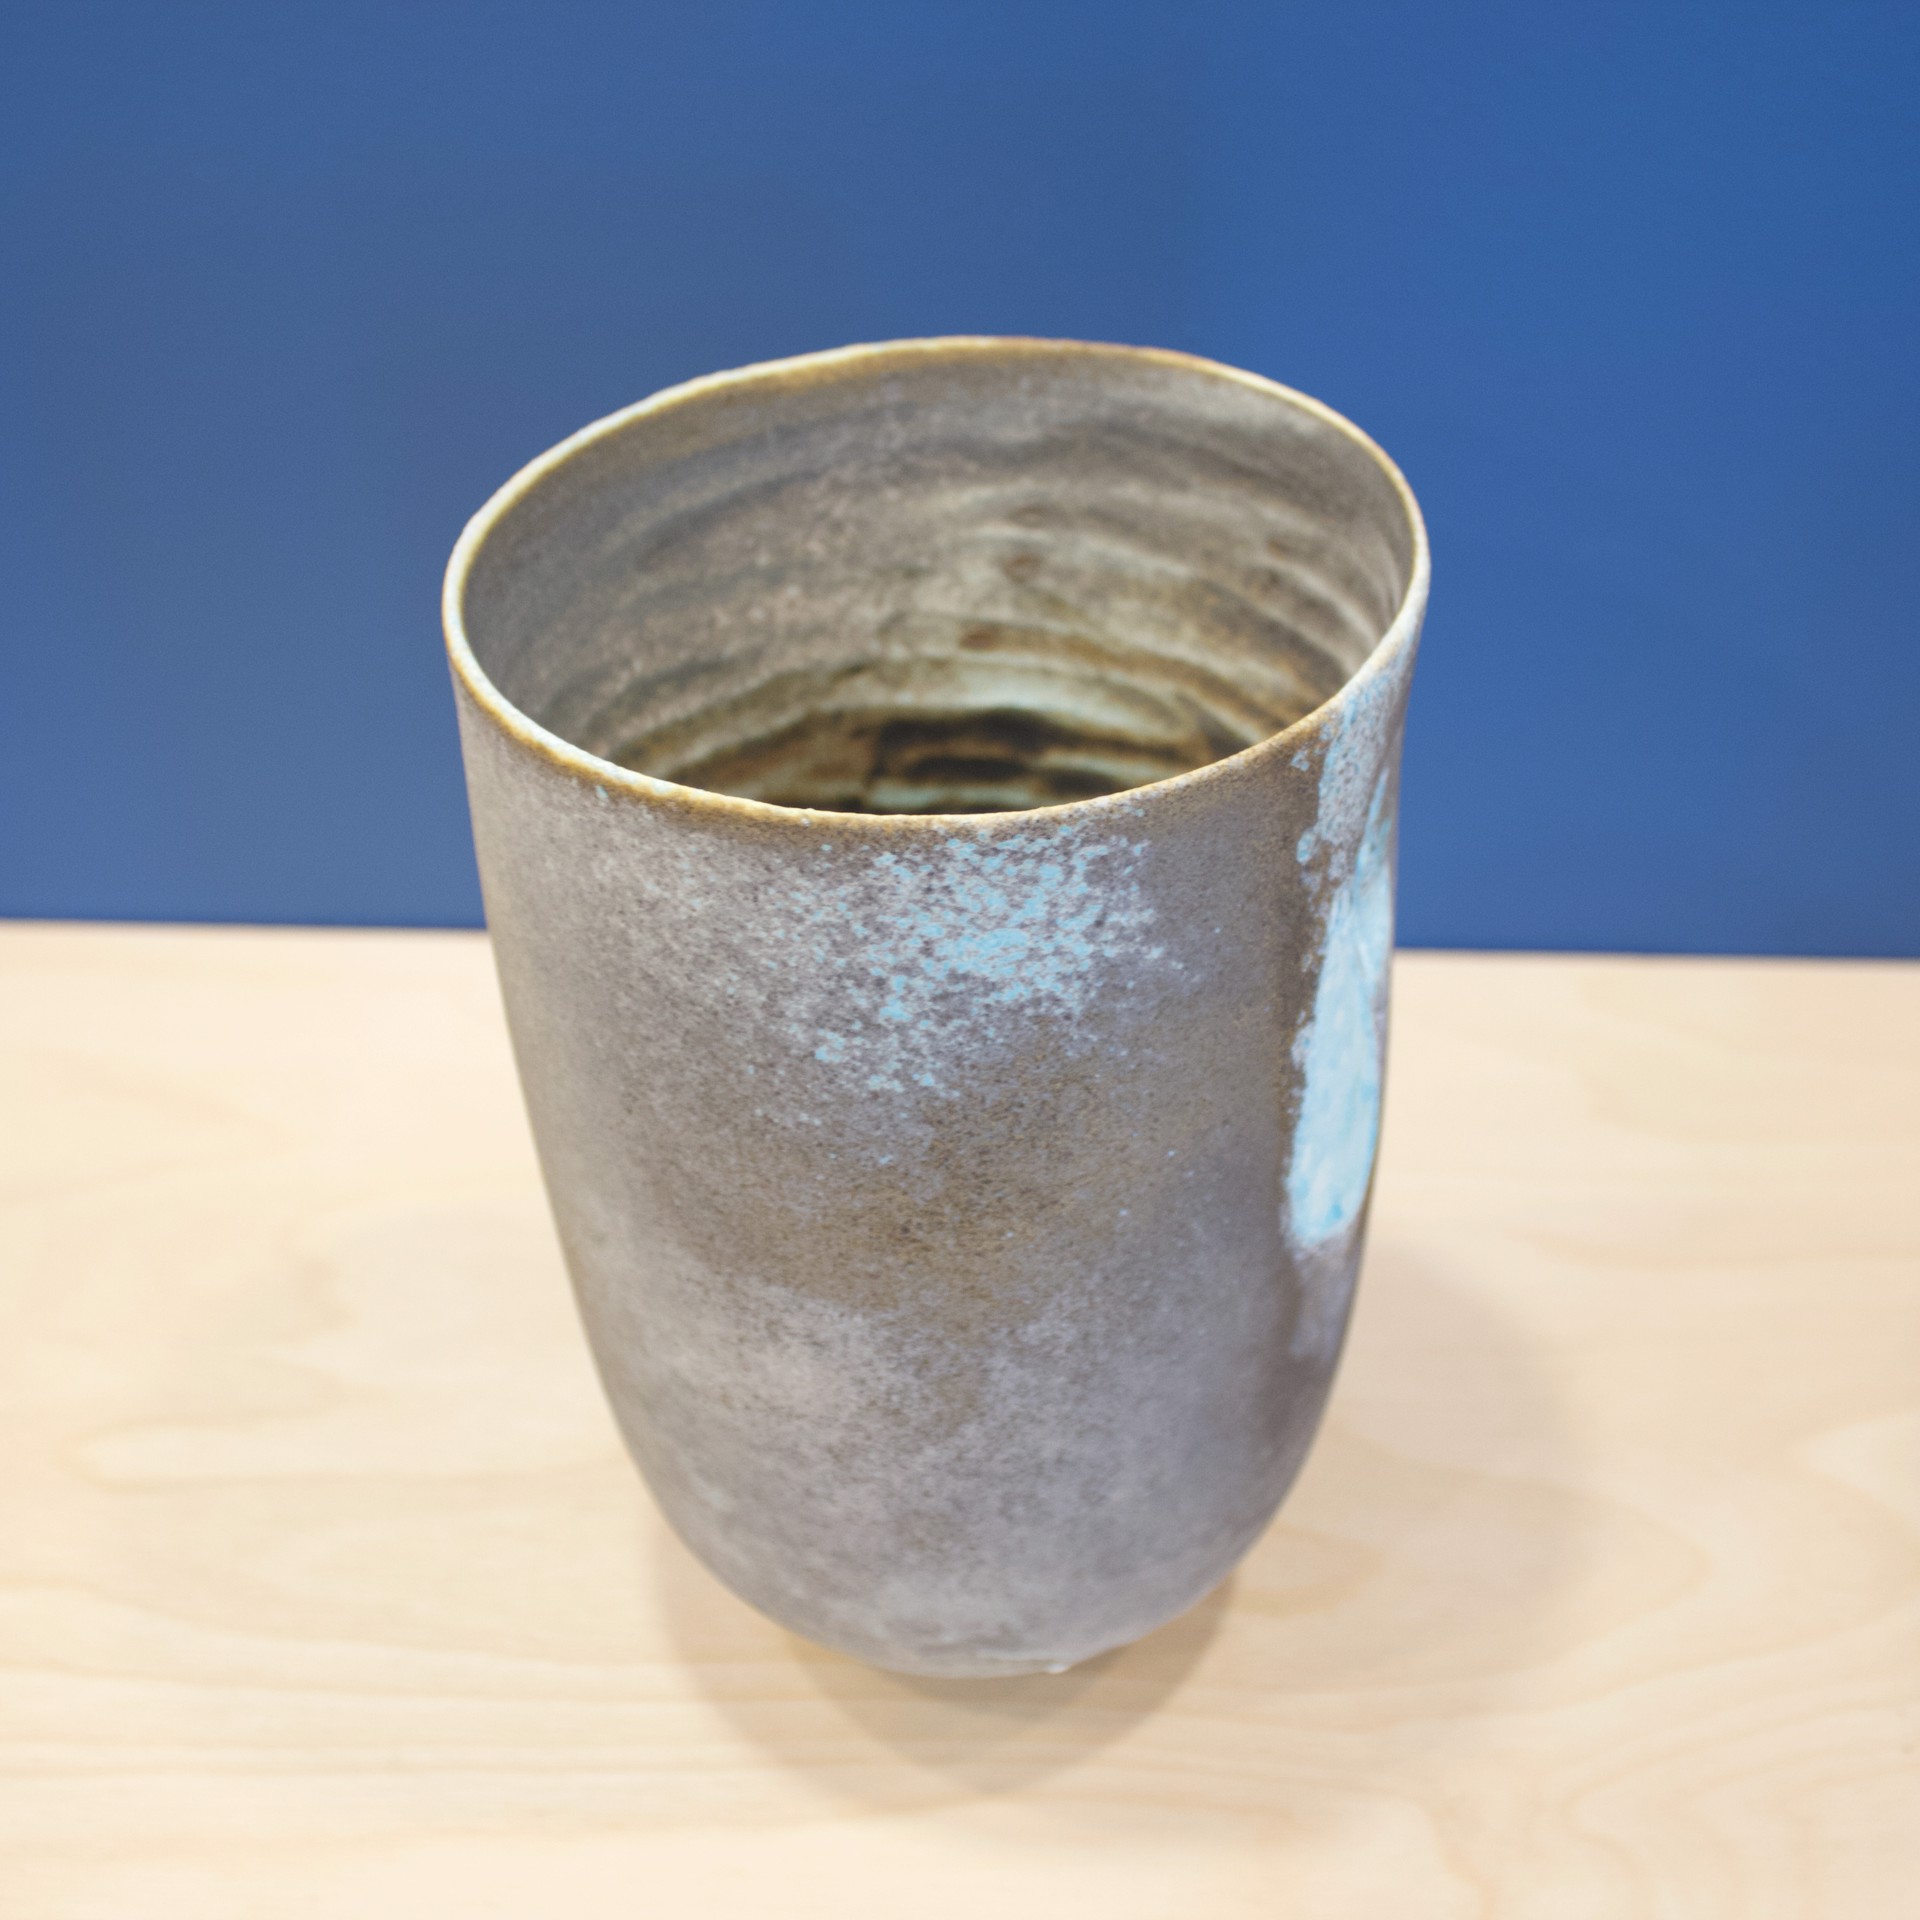 Tall Smokey Conical Vessel With Soda Flashings by Jack Doherty